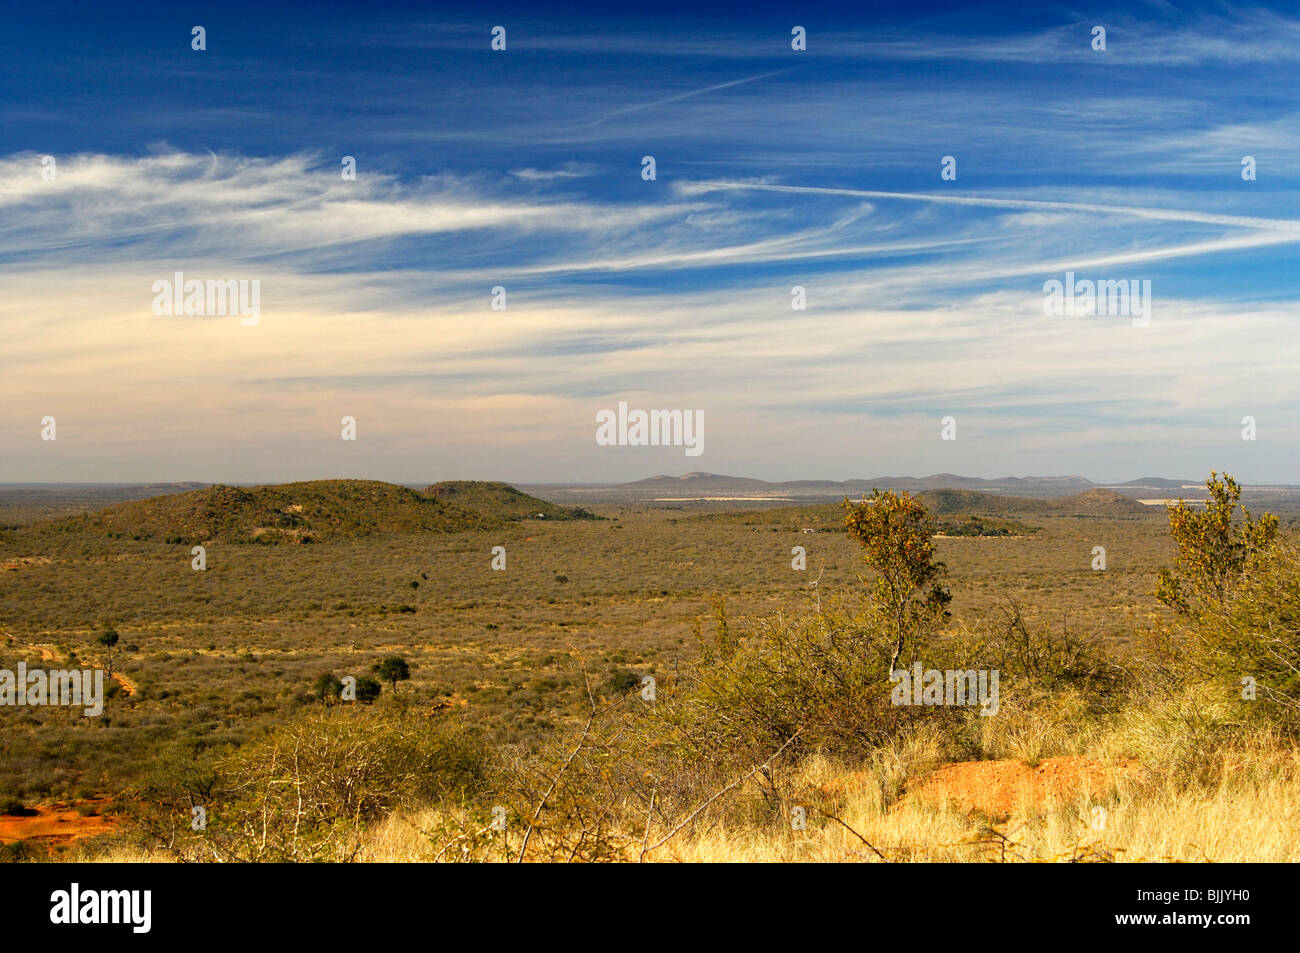 View over the vast African savannah landscape in the Madikwe Game Reserve, South Africa, Africa Stock Photo